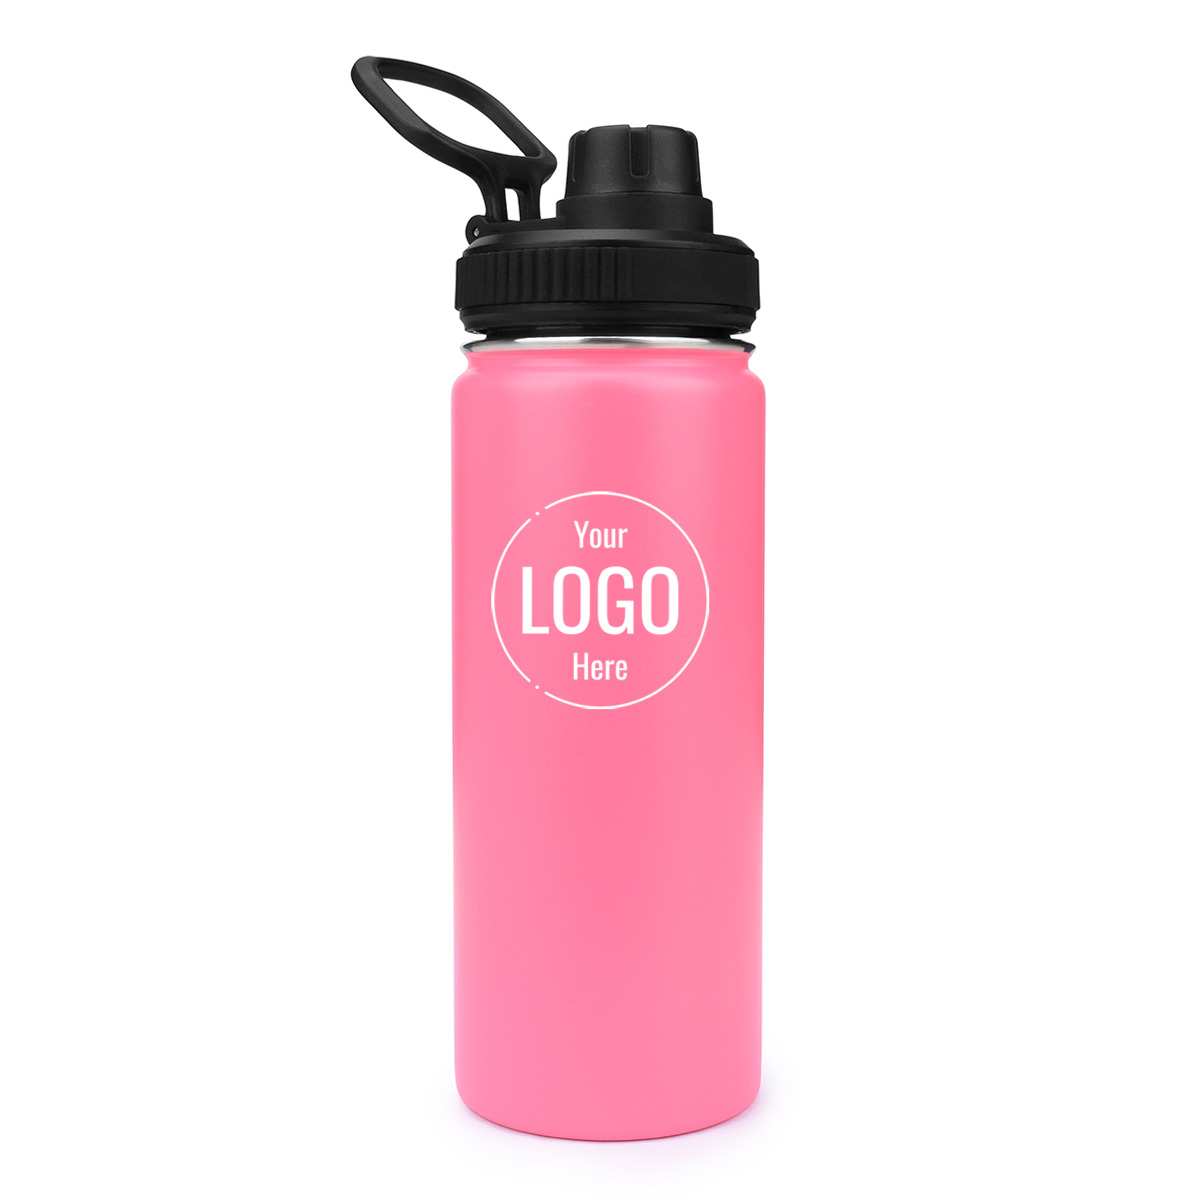 thermos Stainless Steel drink Bottle with Spout Lid hot pink